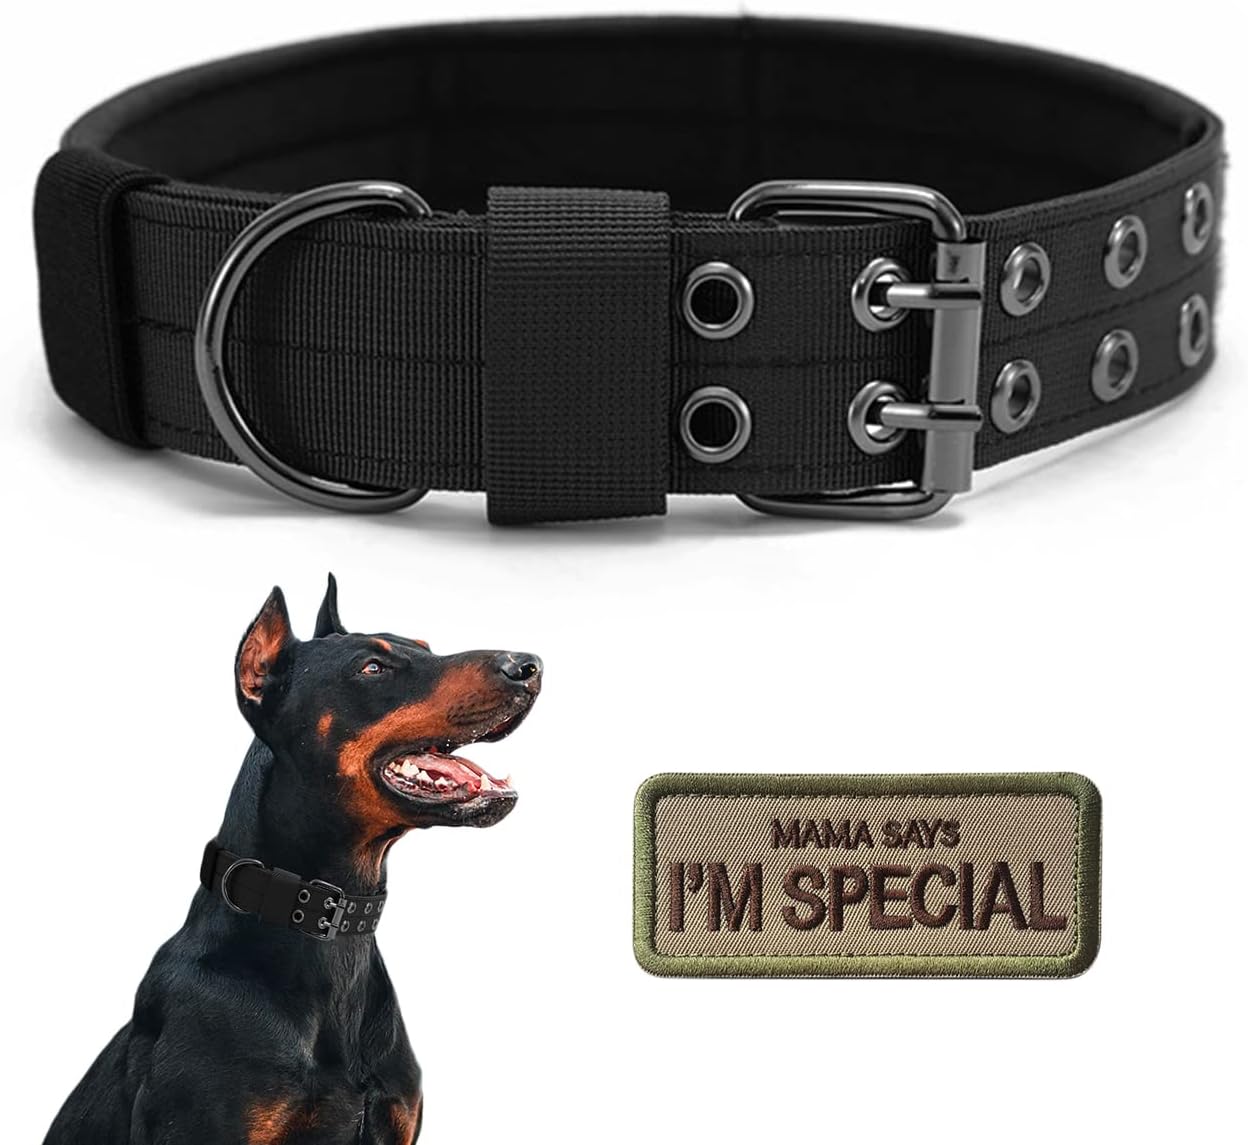 Tactical Dog Collar Military Adjustable Dog Collars Soft Nylon K9 Training Collar with Patch Heavy Duty Metal Buckle Collars for Medium Large Dogs (L, Black)